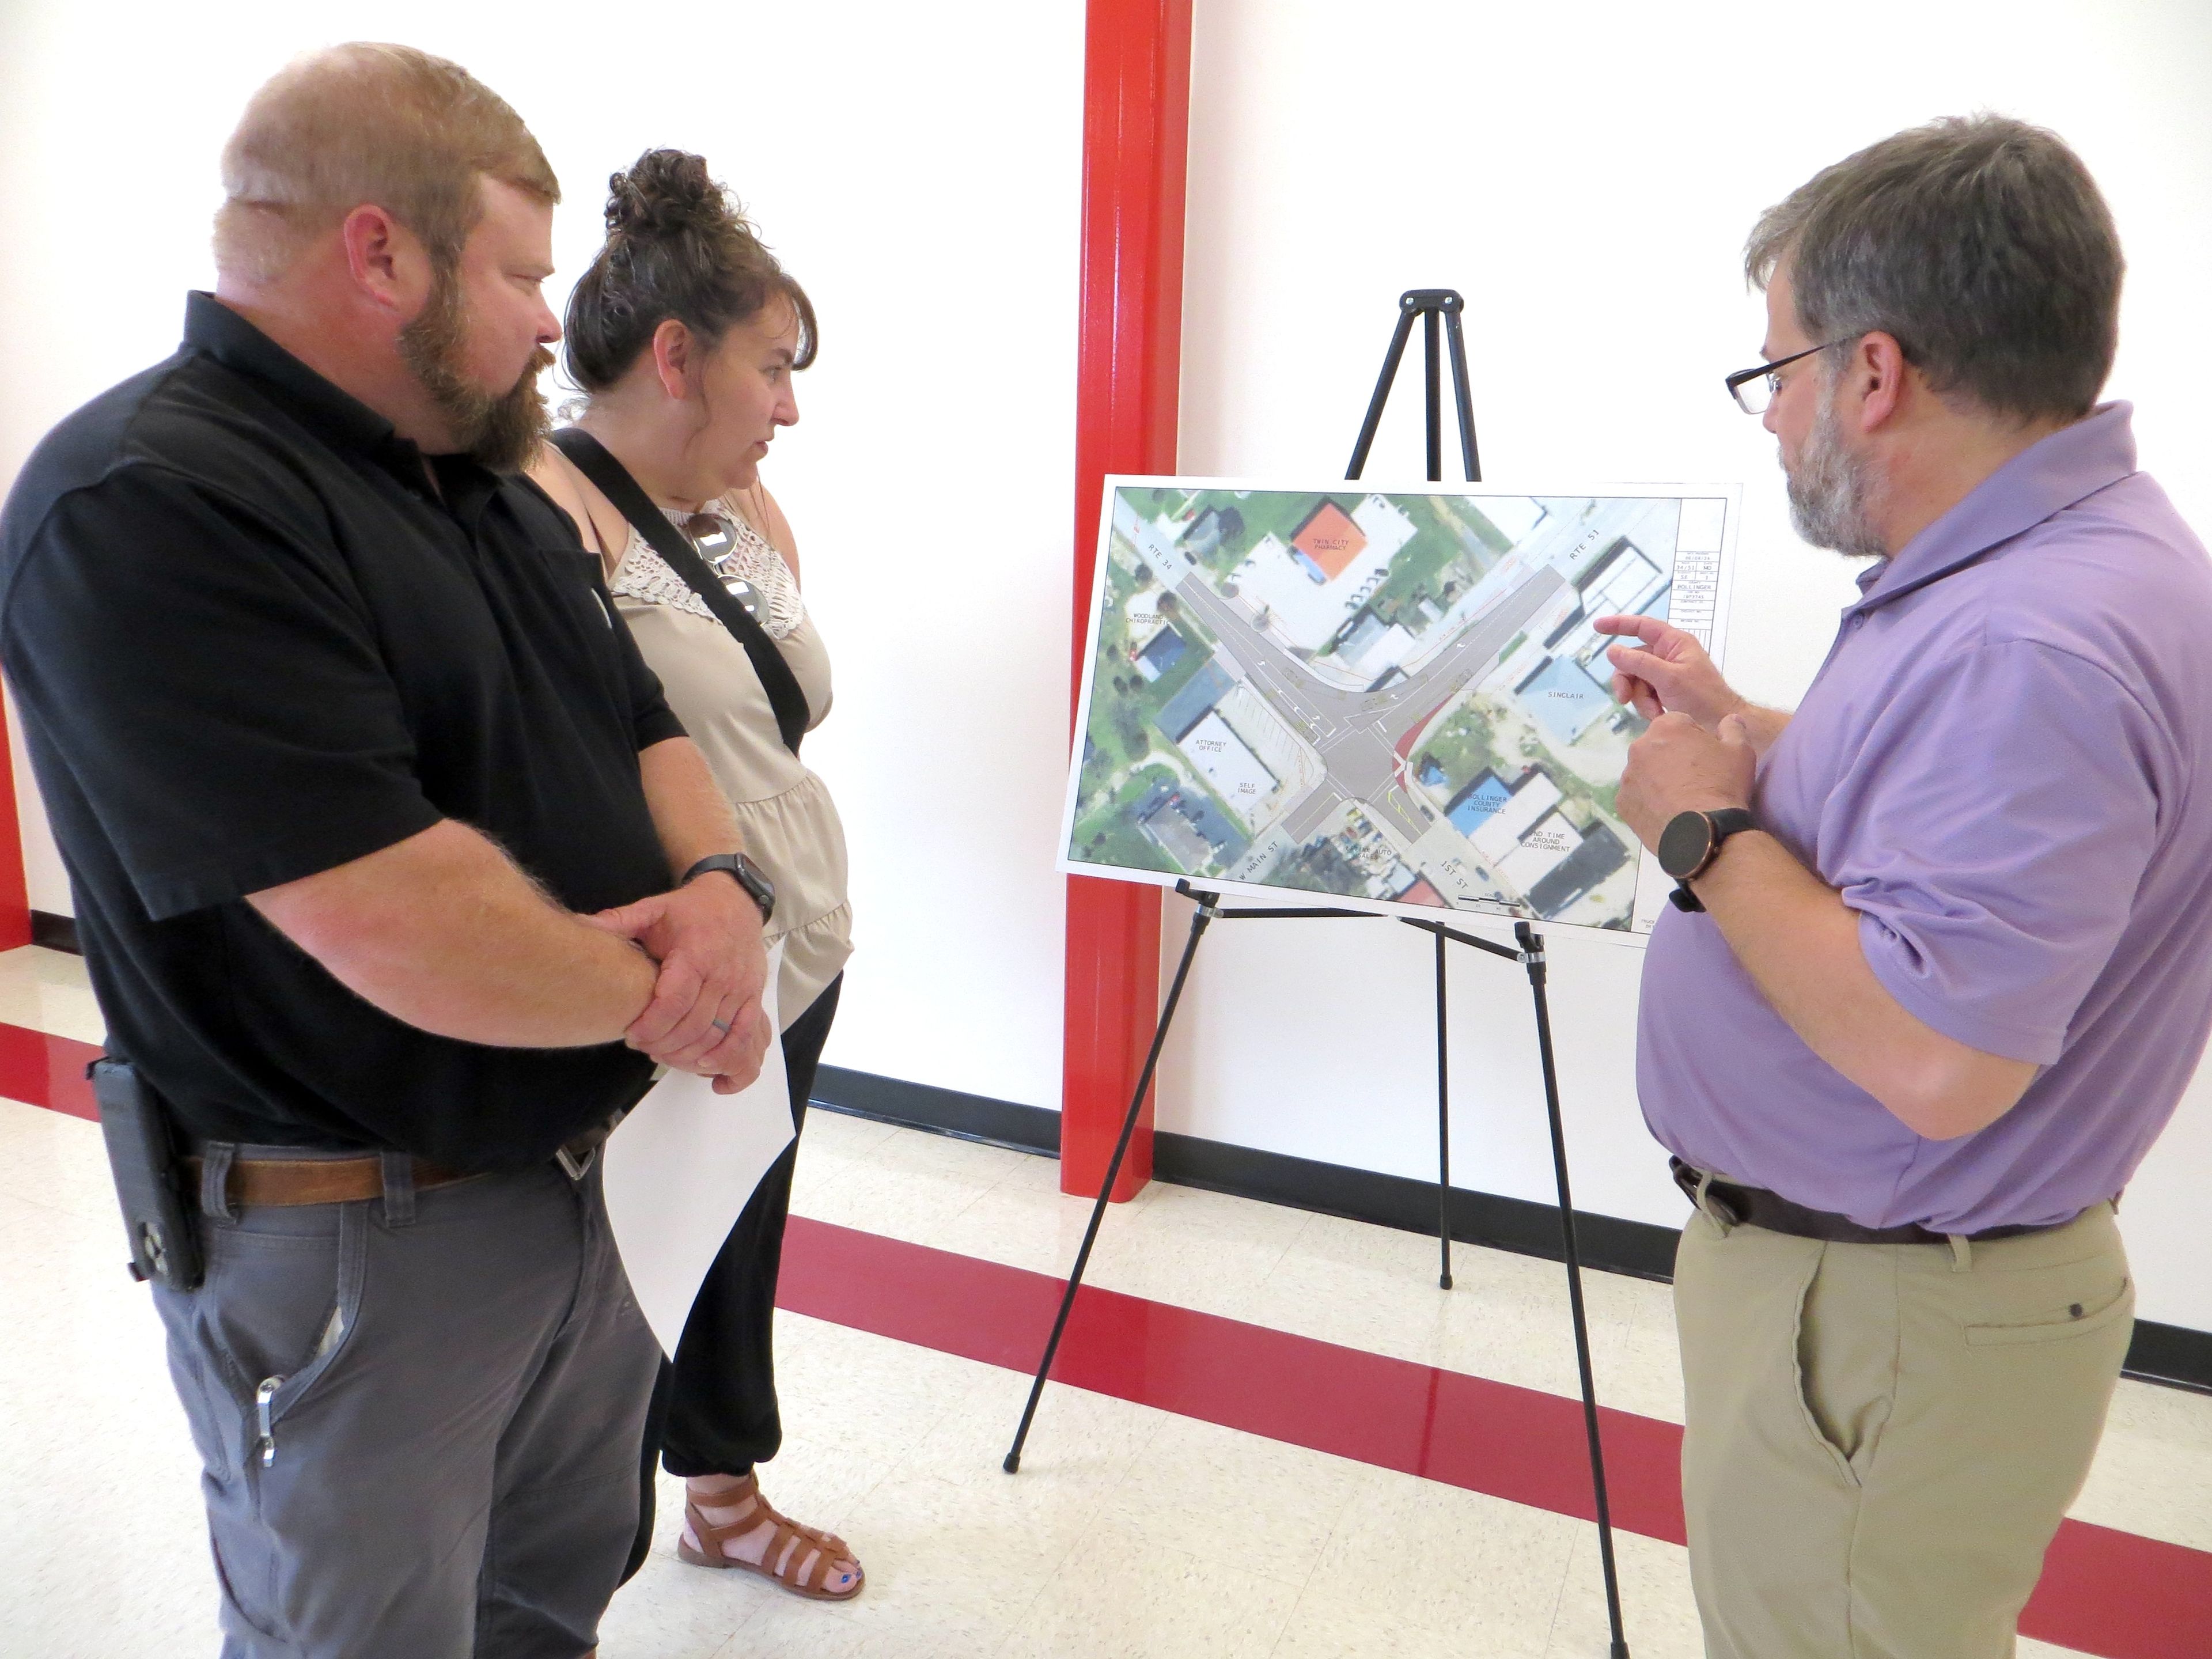 Missouri Department of Transportation project manager Tim Pickett talks to Marble Hill Mayor Trey Wiginton and Bollinger County Chamber of Commerce president Becky Wiginton about the plans to improve the south Route 34/51 intersection in Marble Hill. An open house-style public meeting was Monday in the FEMA building at Woodland School, where visitors could stop by any time from 5 to 7 p.m. to discuss the details of the project with MoDOT officials. The project includes upgrading the existing Route 34/51 intersection to improve turning movements for tractor trailers and other large vehicles, and adding a section of sidewalk to connect to the existing pedestrian facility. The project is expected to be let in February, and construction could begin as early as next spring. Work will be staged to allow the intersection to remain open with minor detours as needed. Completion is anticipated in November 2025.